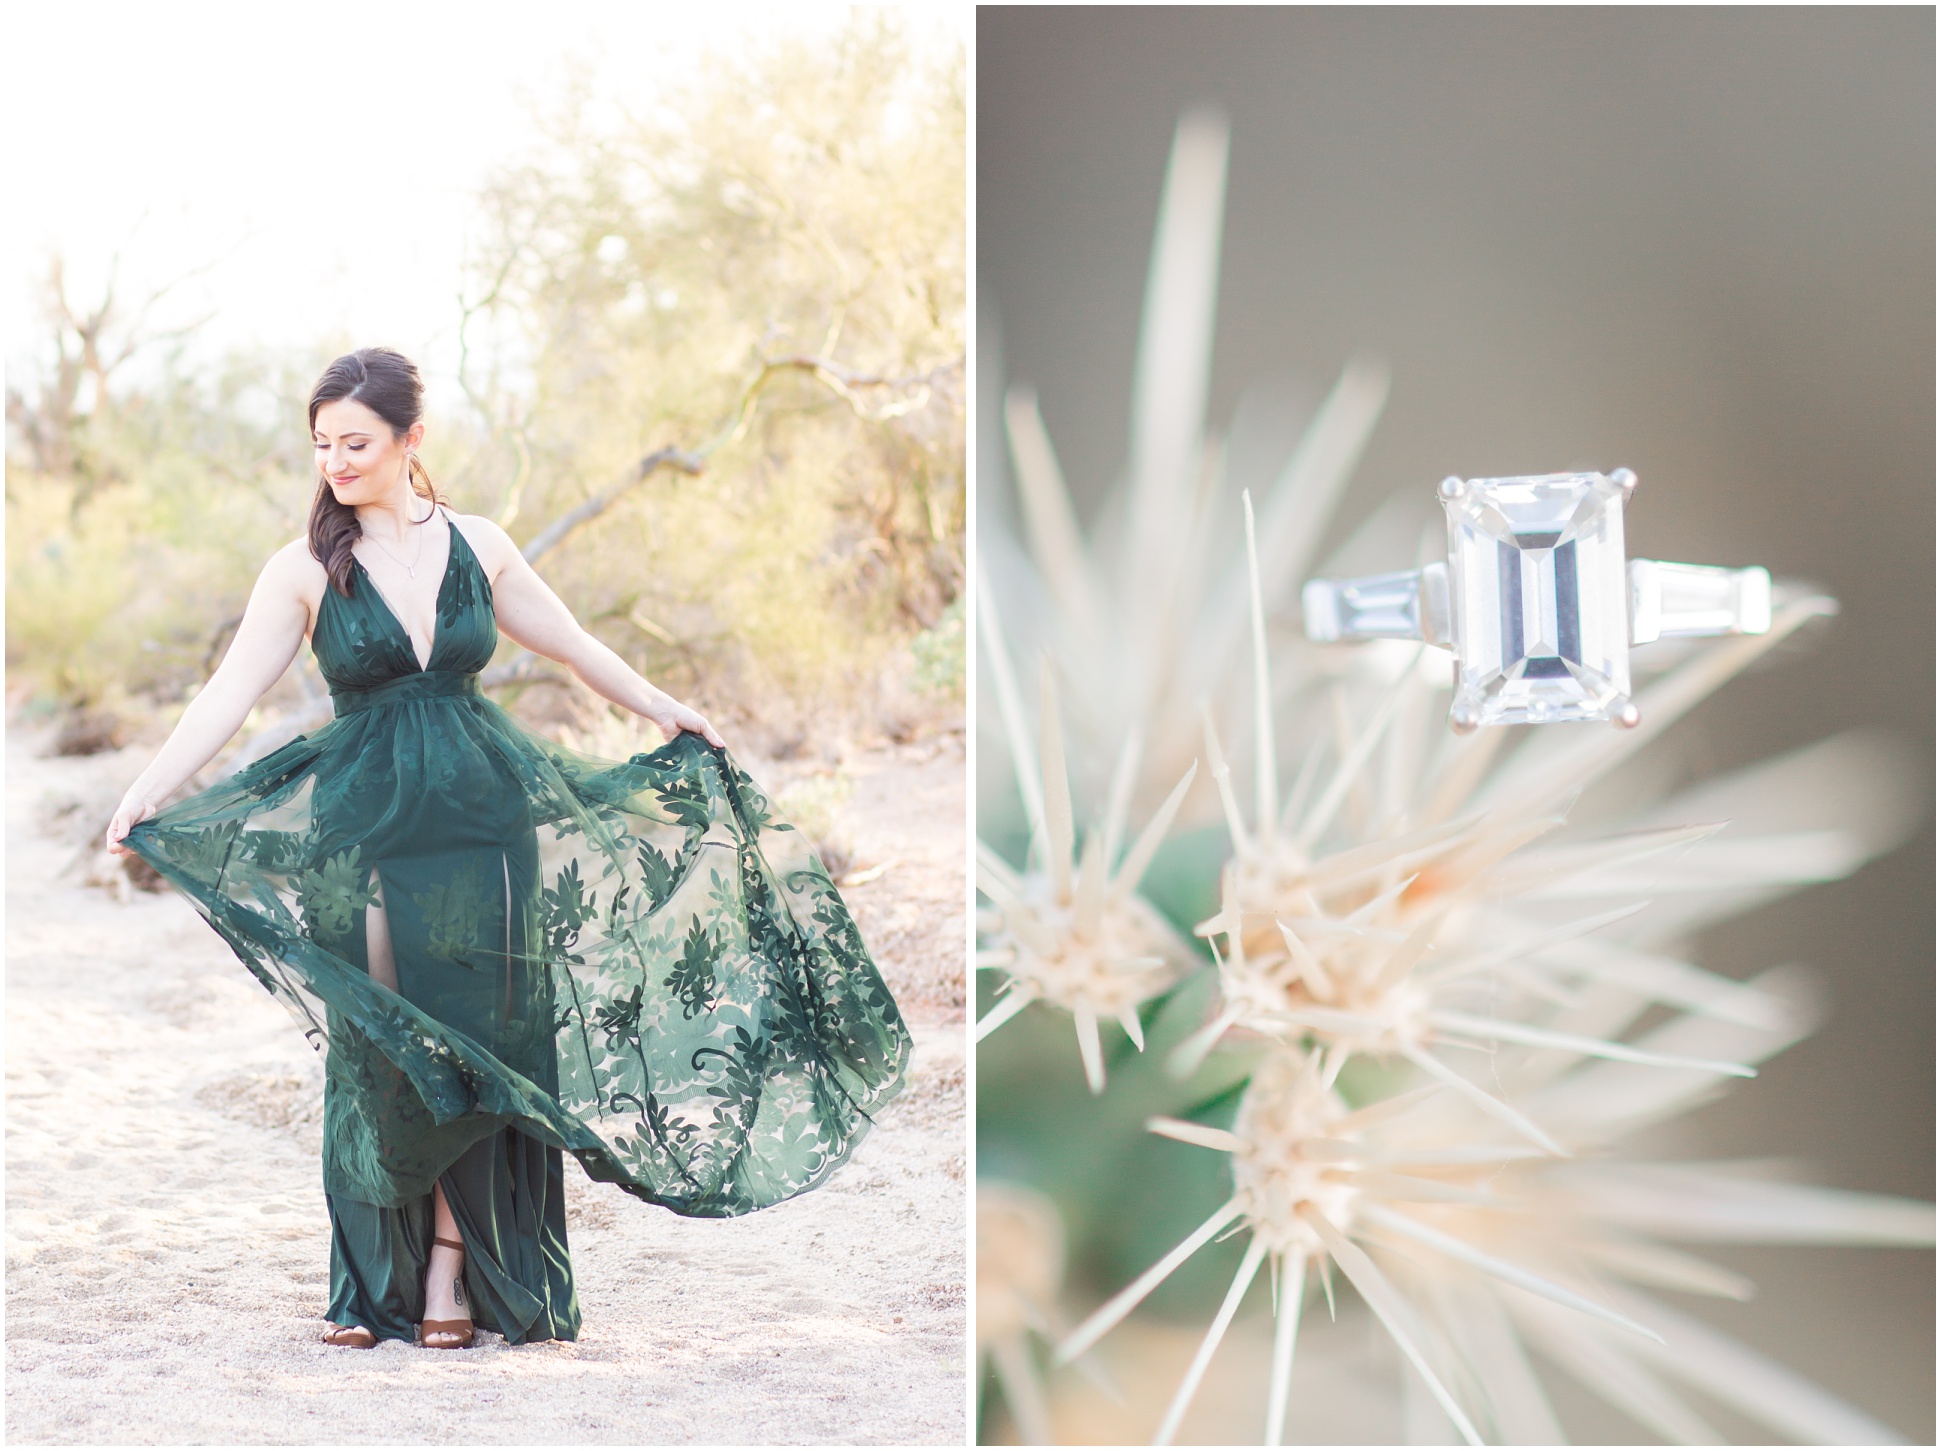 Left Image: Kaila playing with her green lace dress, right image: Square diamond engagement ring on cancus